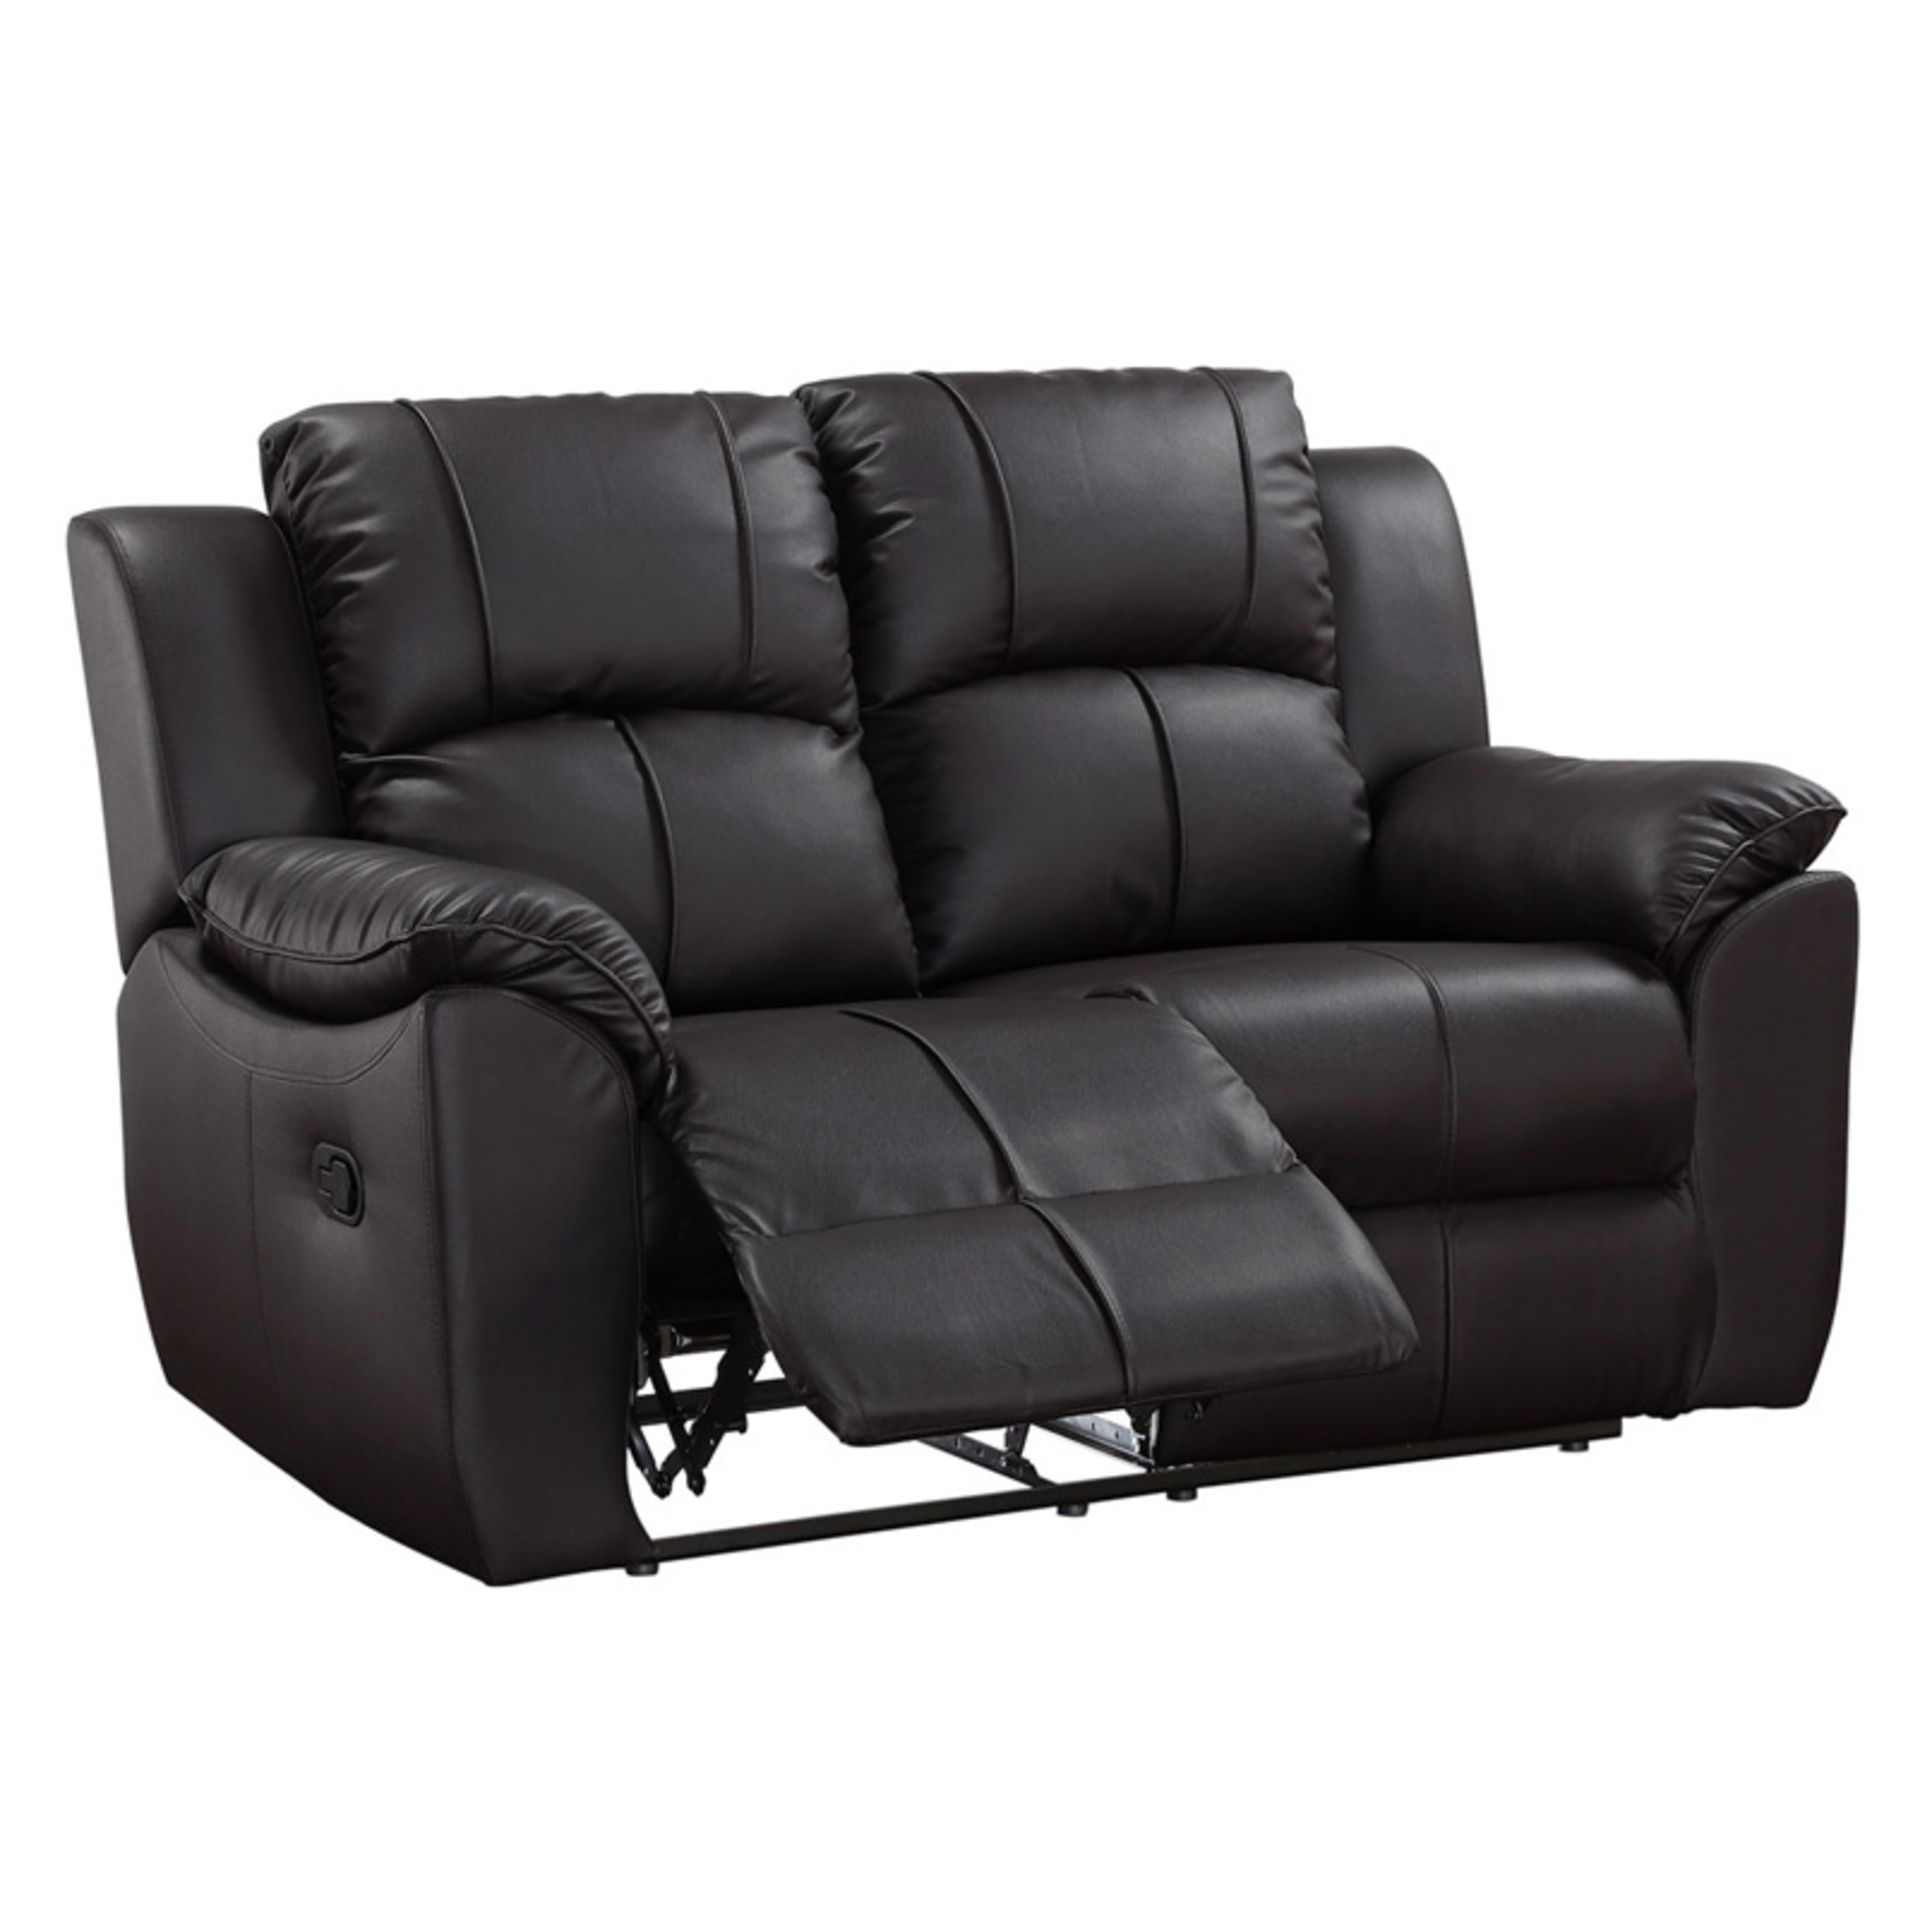 Boxed Black Leather Stitched Detail 2 Seater Reclyner Sofa RRP £700 (Sourced From A High End